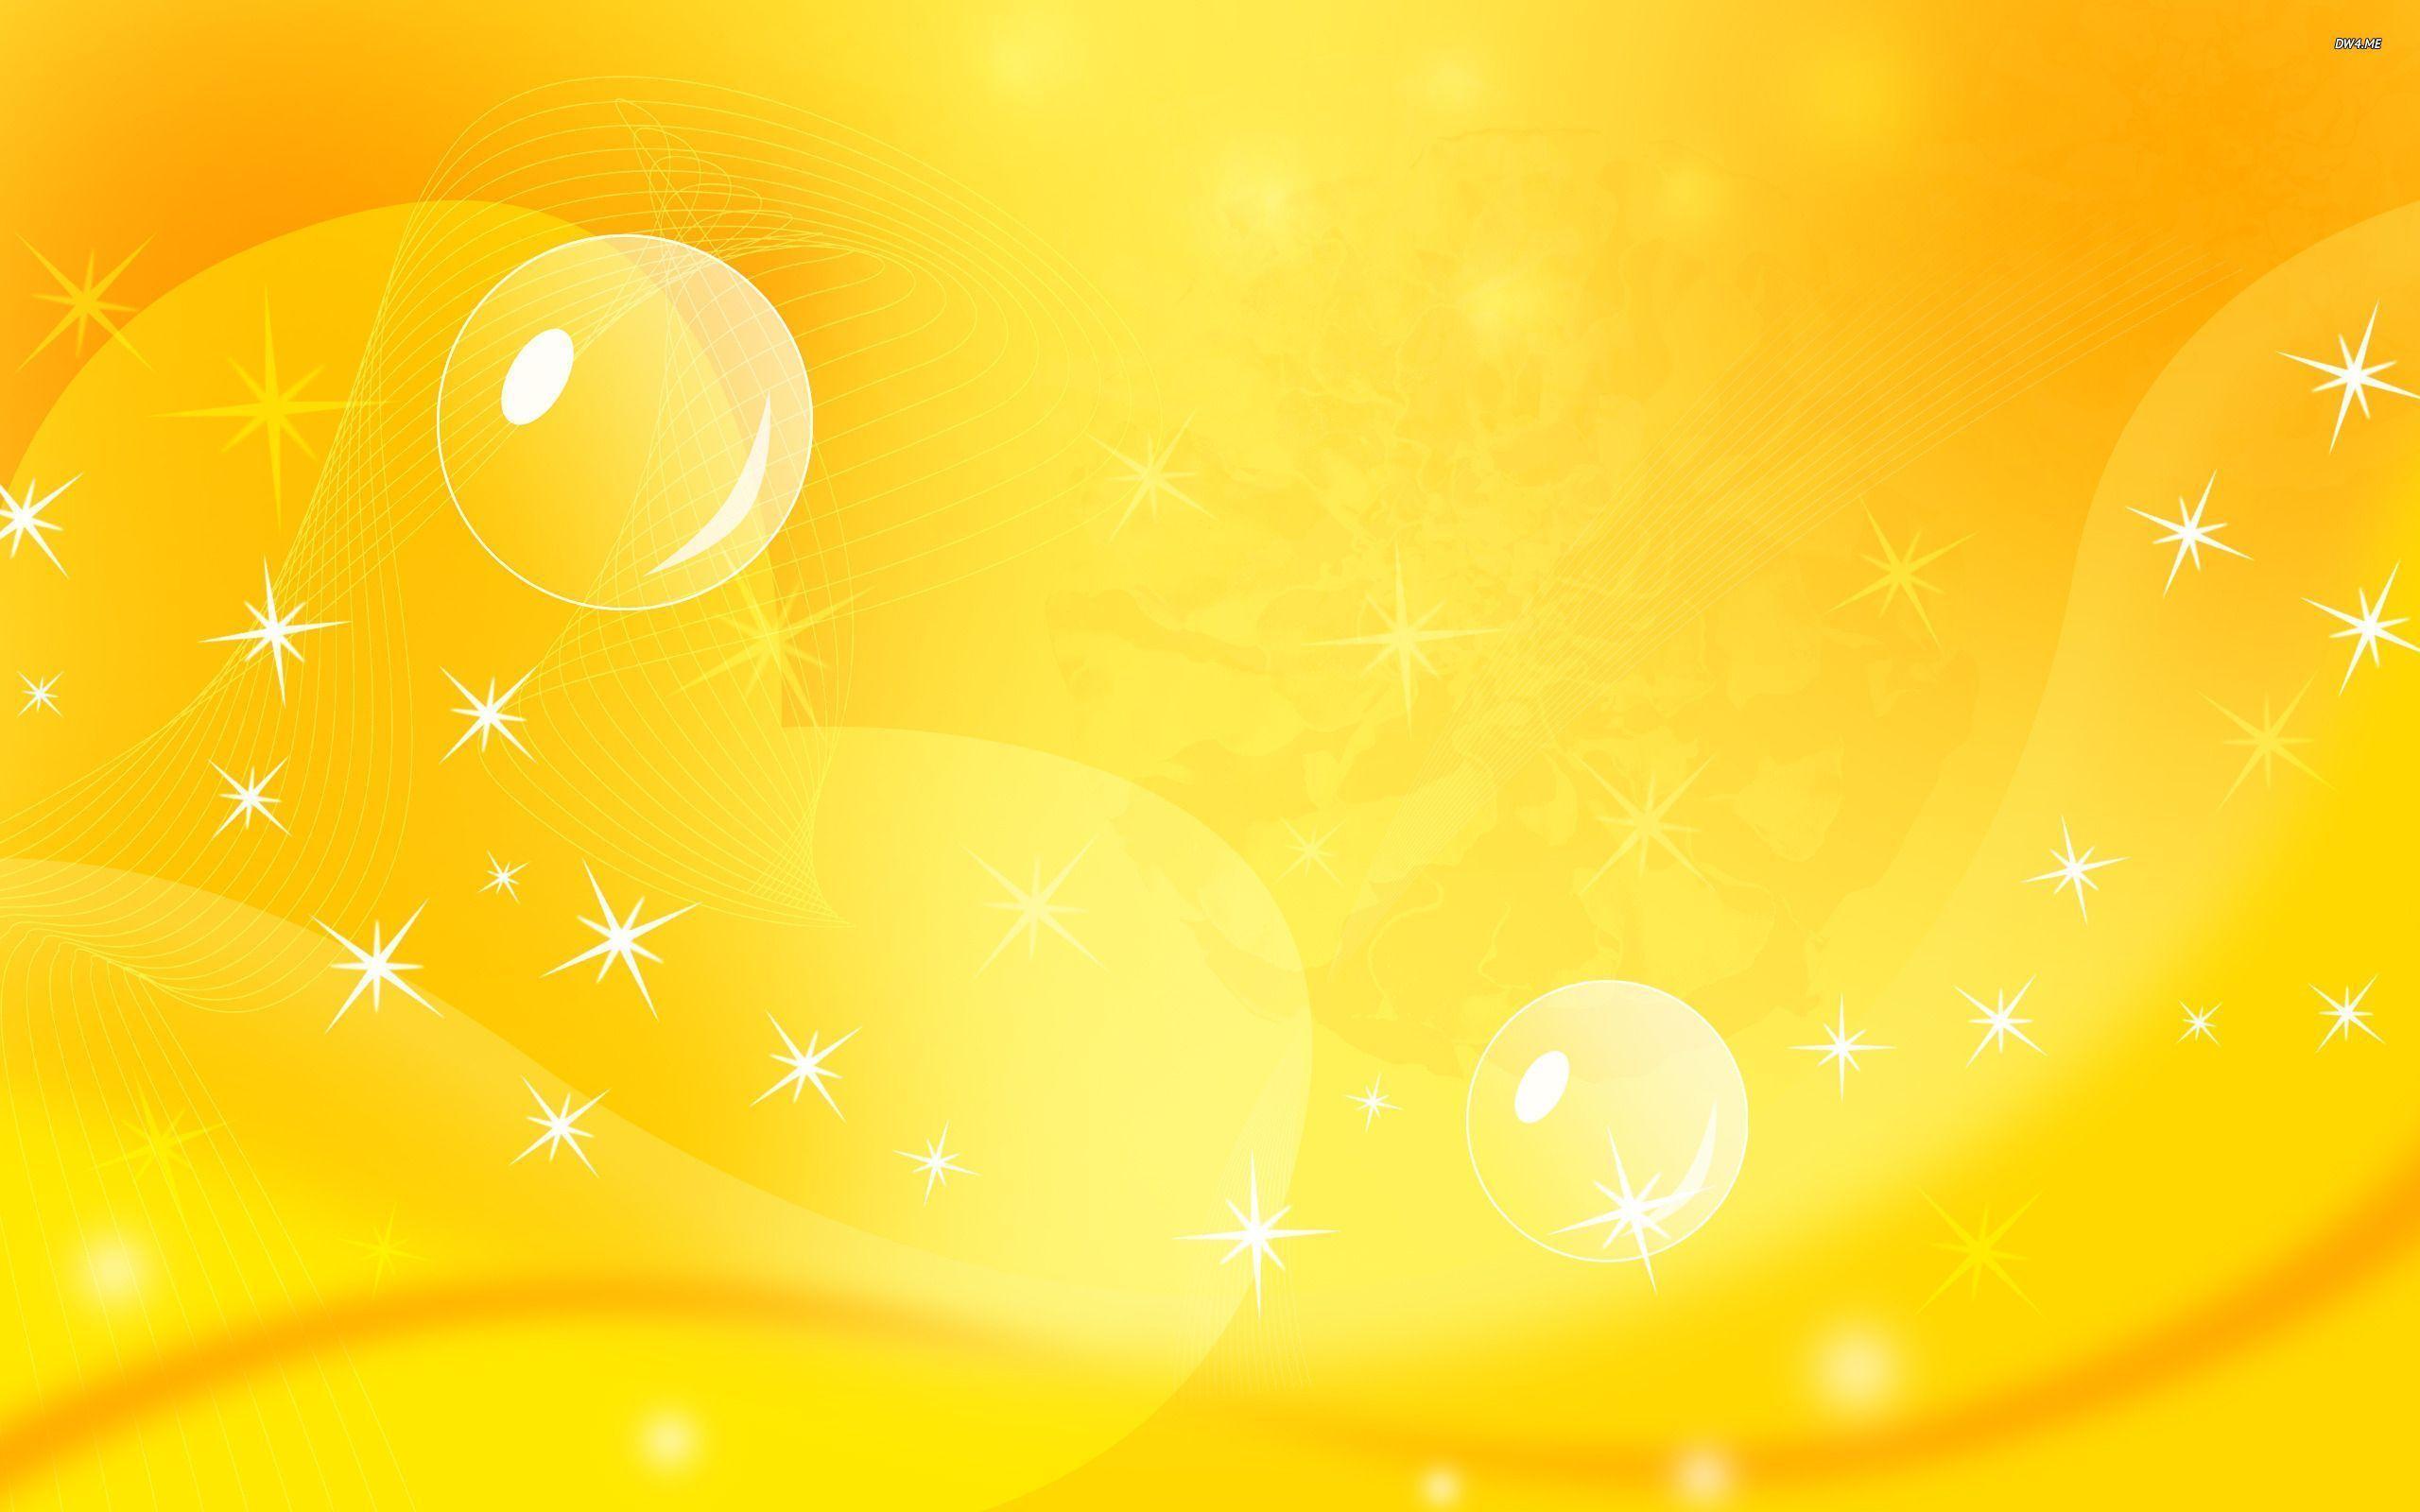 Wallpaper For > Bright Yellow Background Designs